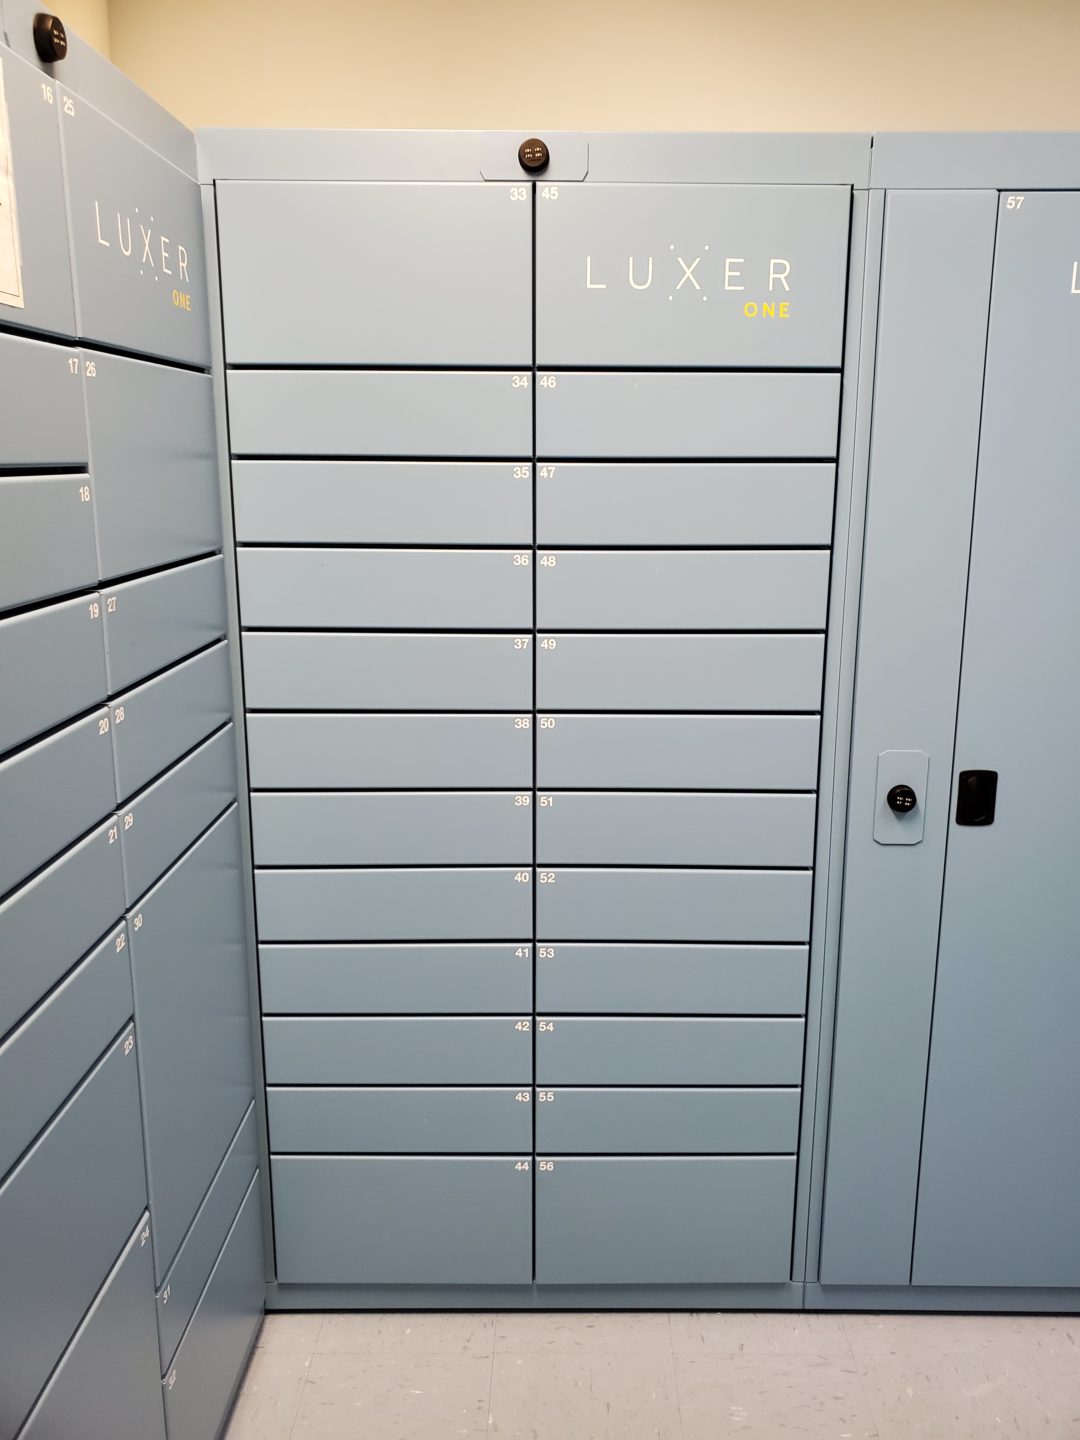 Lockourier RBC Insurance Services Lockers